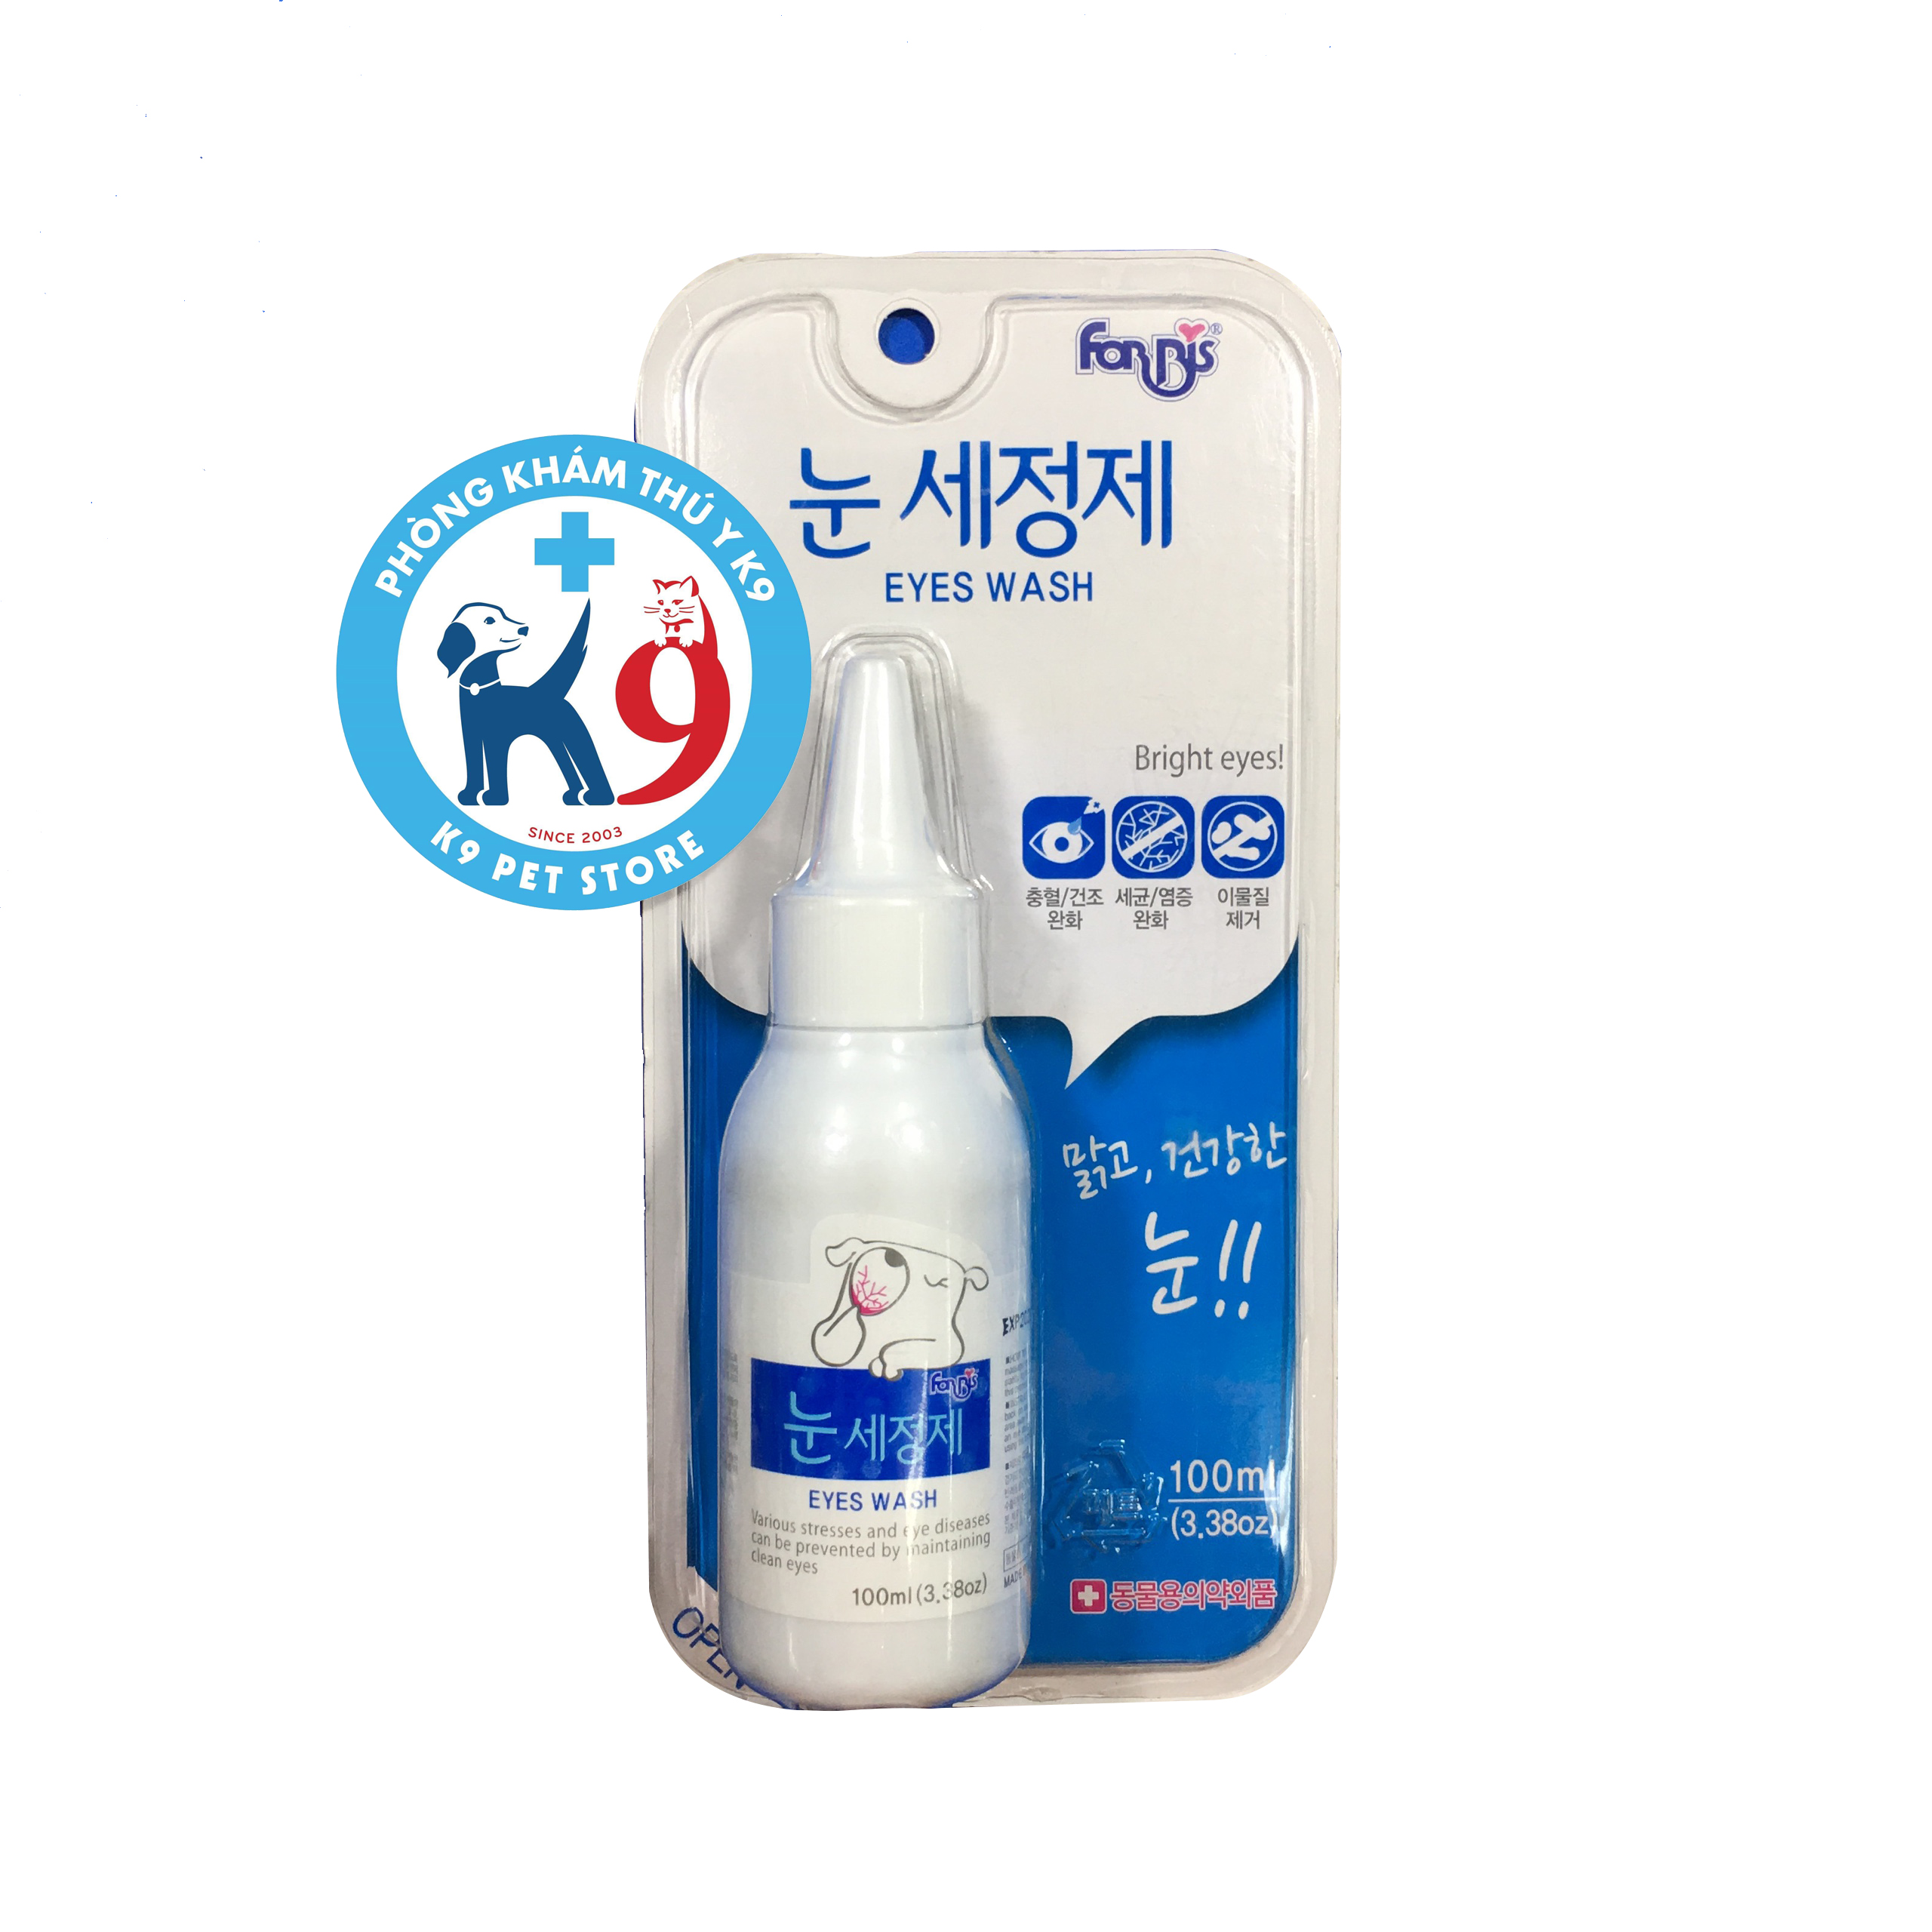 Dung dịch rửa mắt Eyes Wash Forcans 100ml